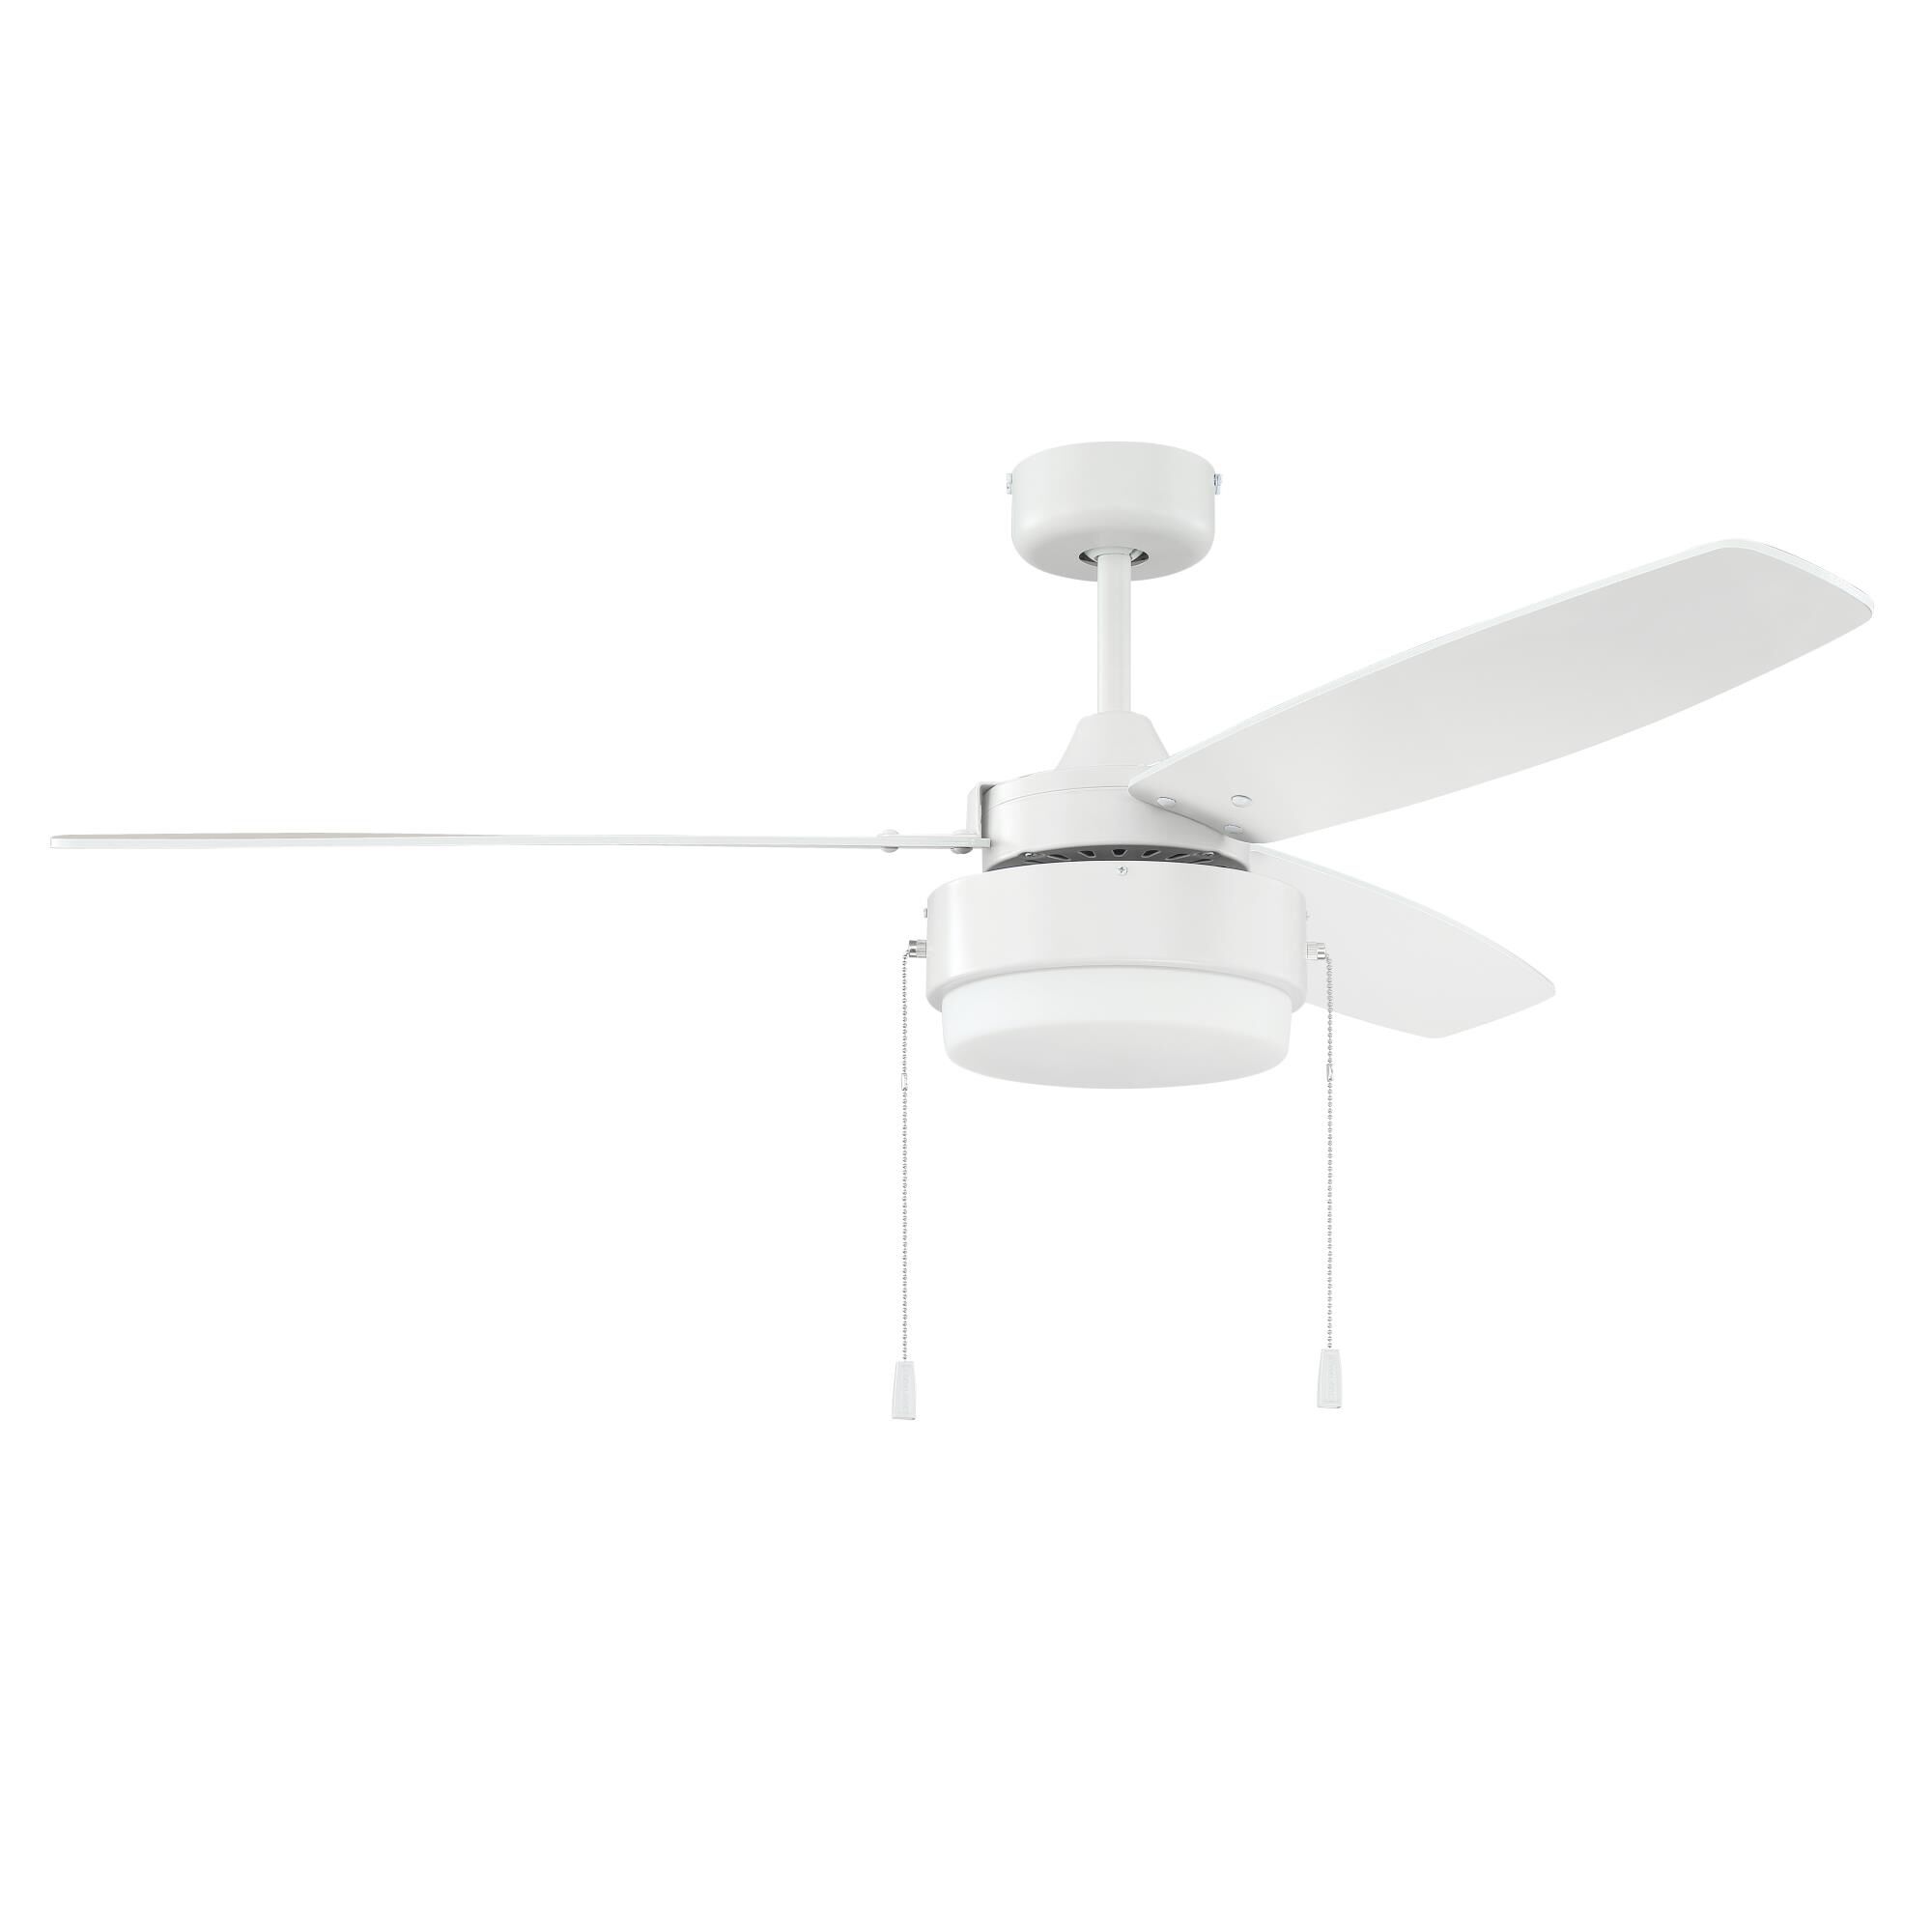 Photos - Fan Craftmade Intrepid 52 Inch Ceiling  with Light Kit Intrepid - INT52W3 